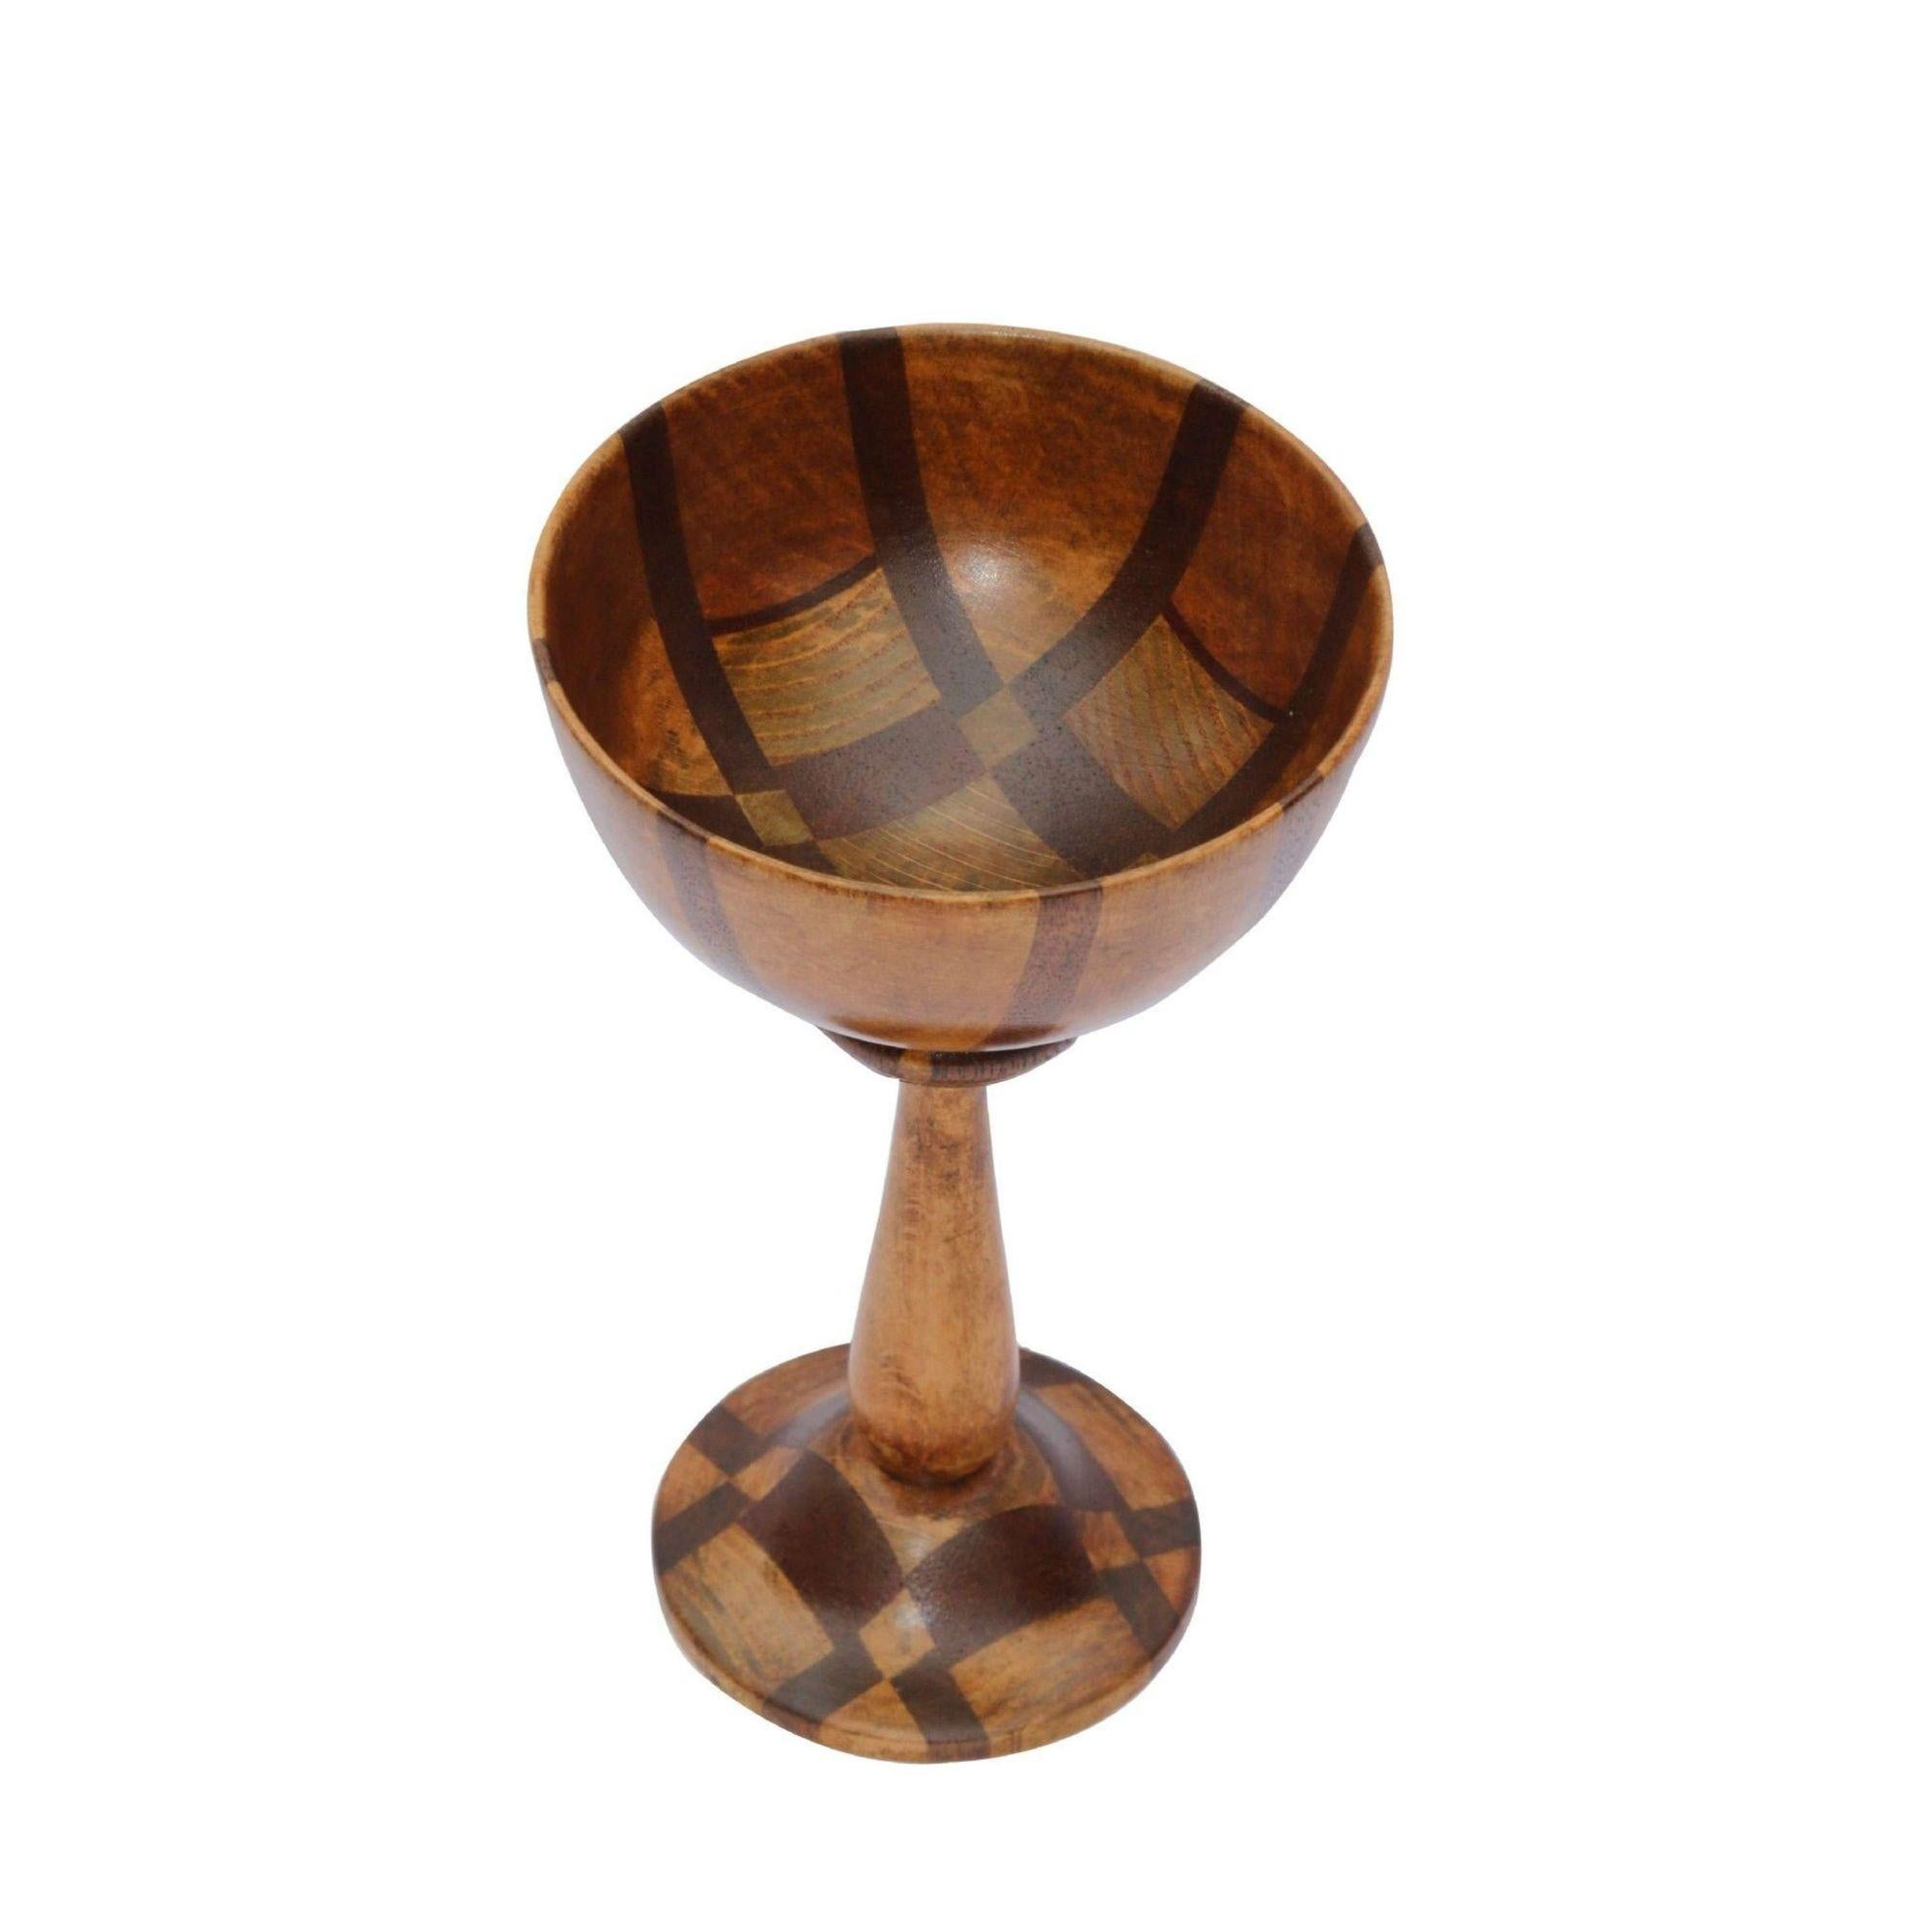 English Arts and Crafts Treen Specimen Wood Turned Goblet circa 1909 For Sale 3